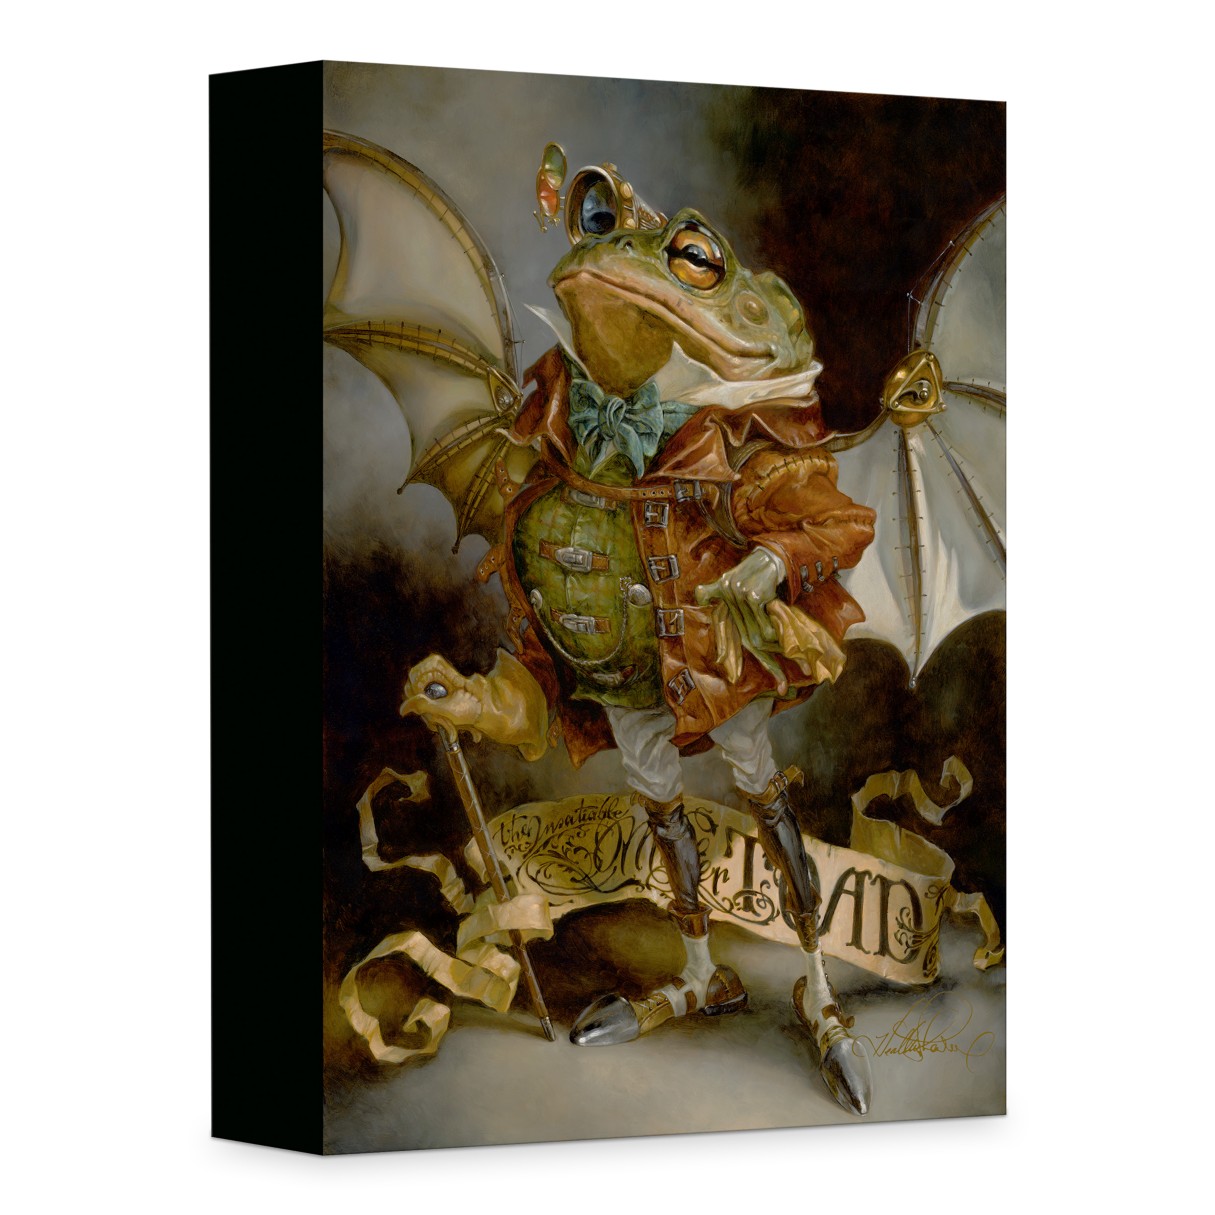 ''The Insatiable Mr. Toad'' Giclée on Canvas by Heather Edwards